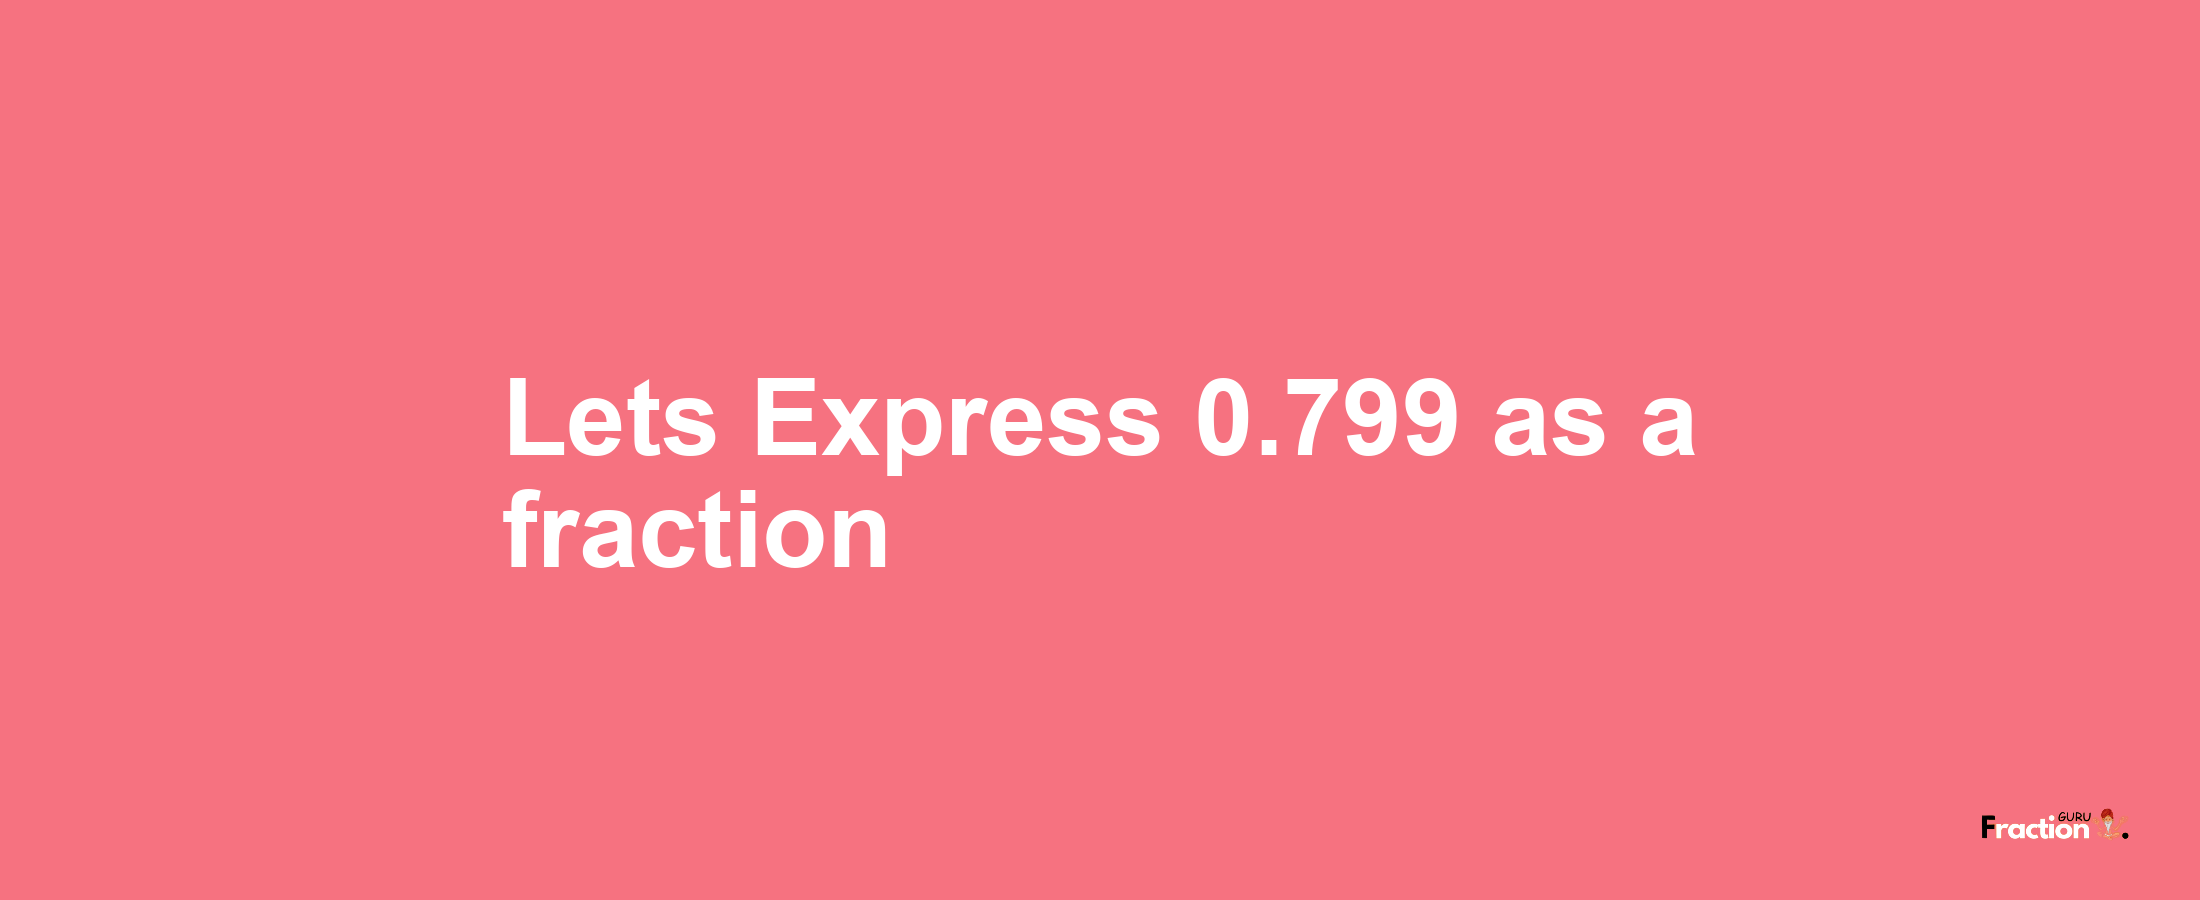 Lets Express 0.799 as afraction